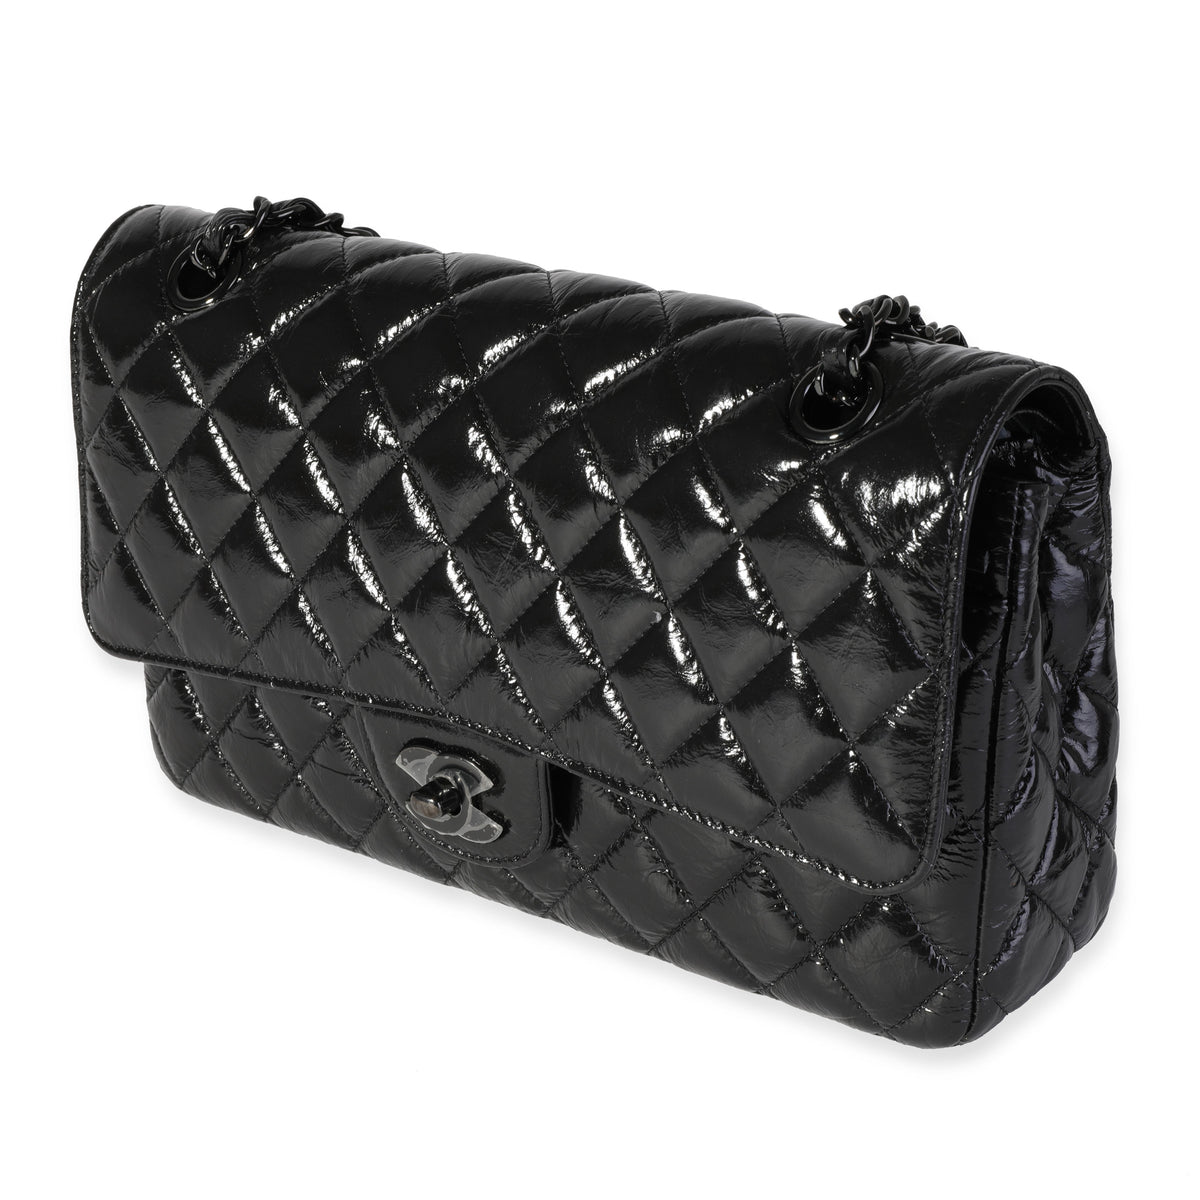 Chanel's Classic Flap Bag Increased In Value Over 70% in Past 6